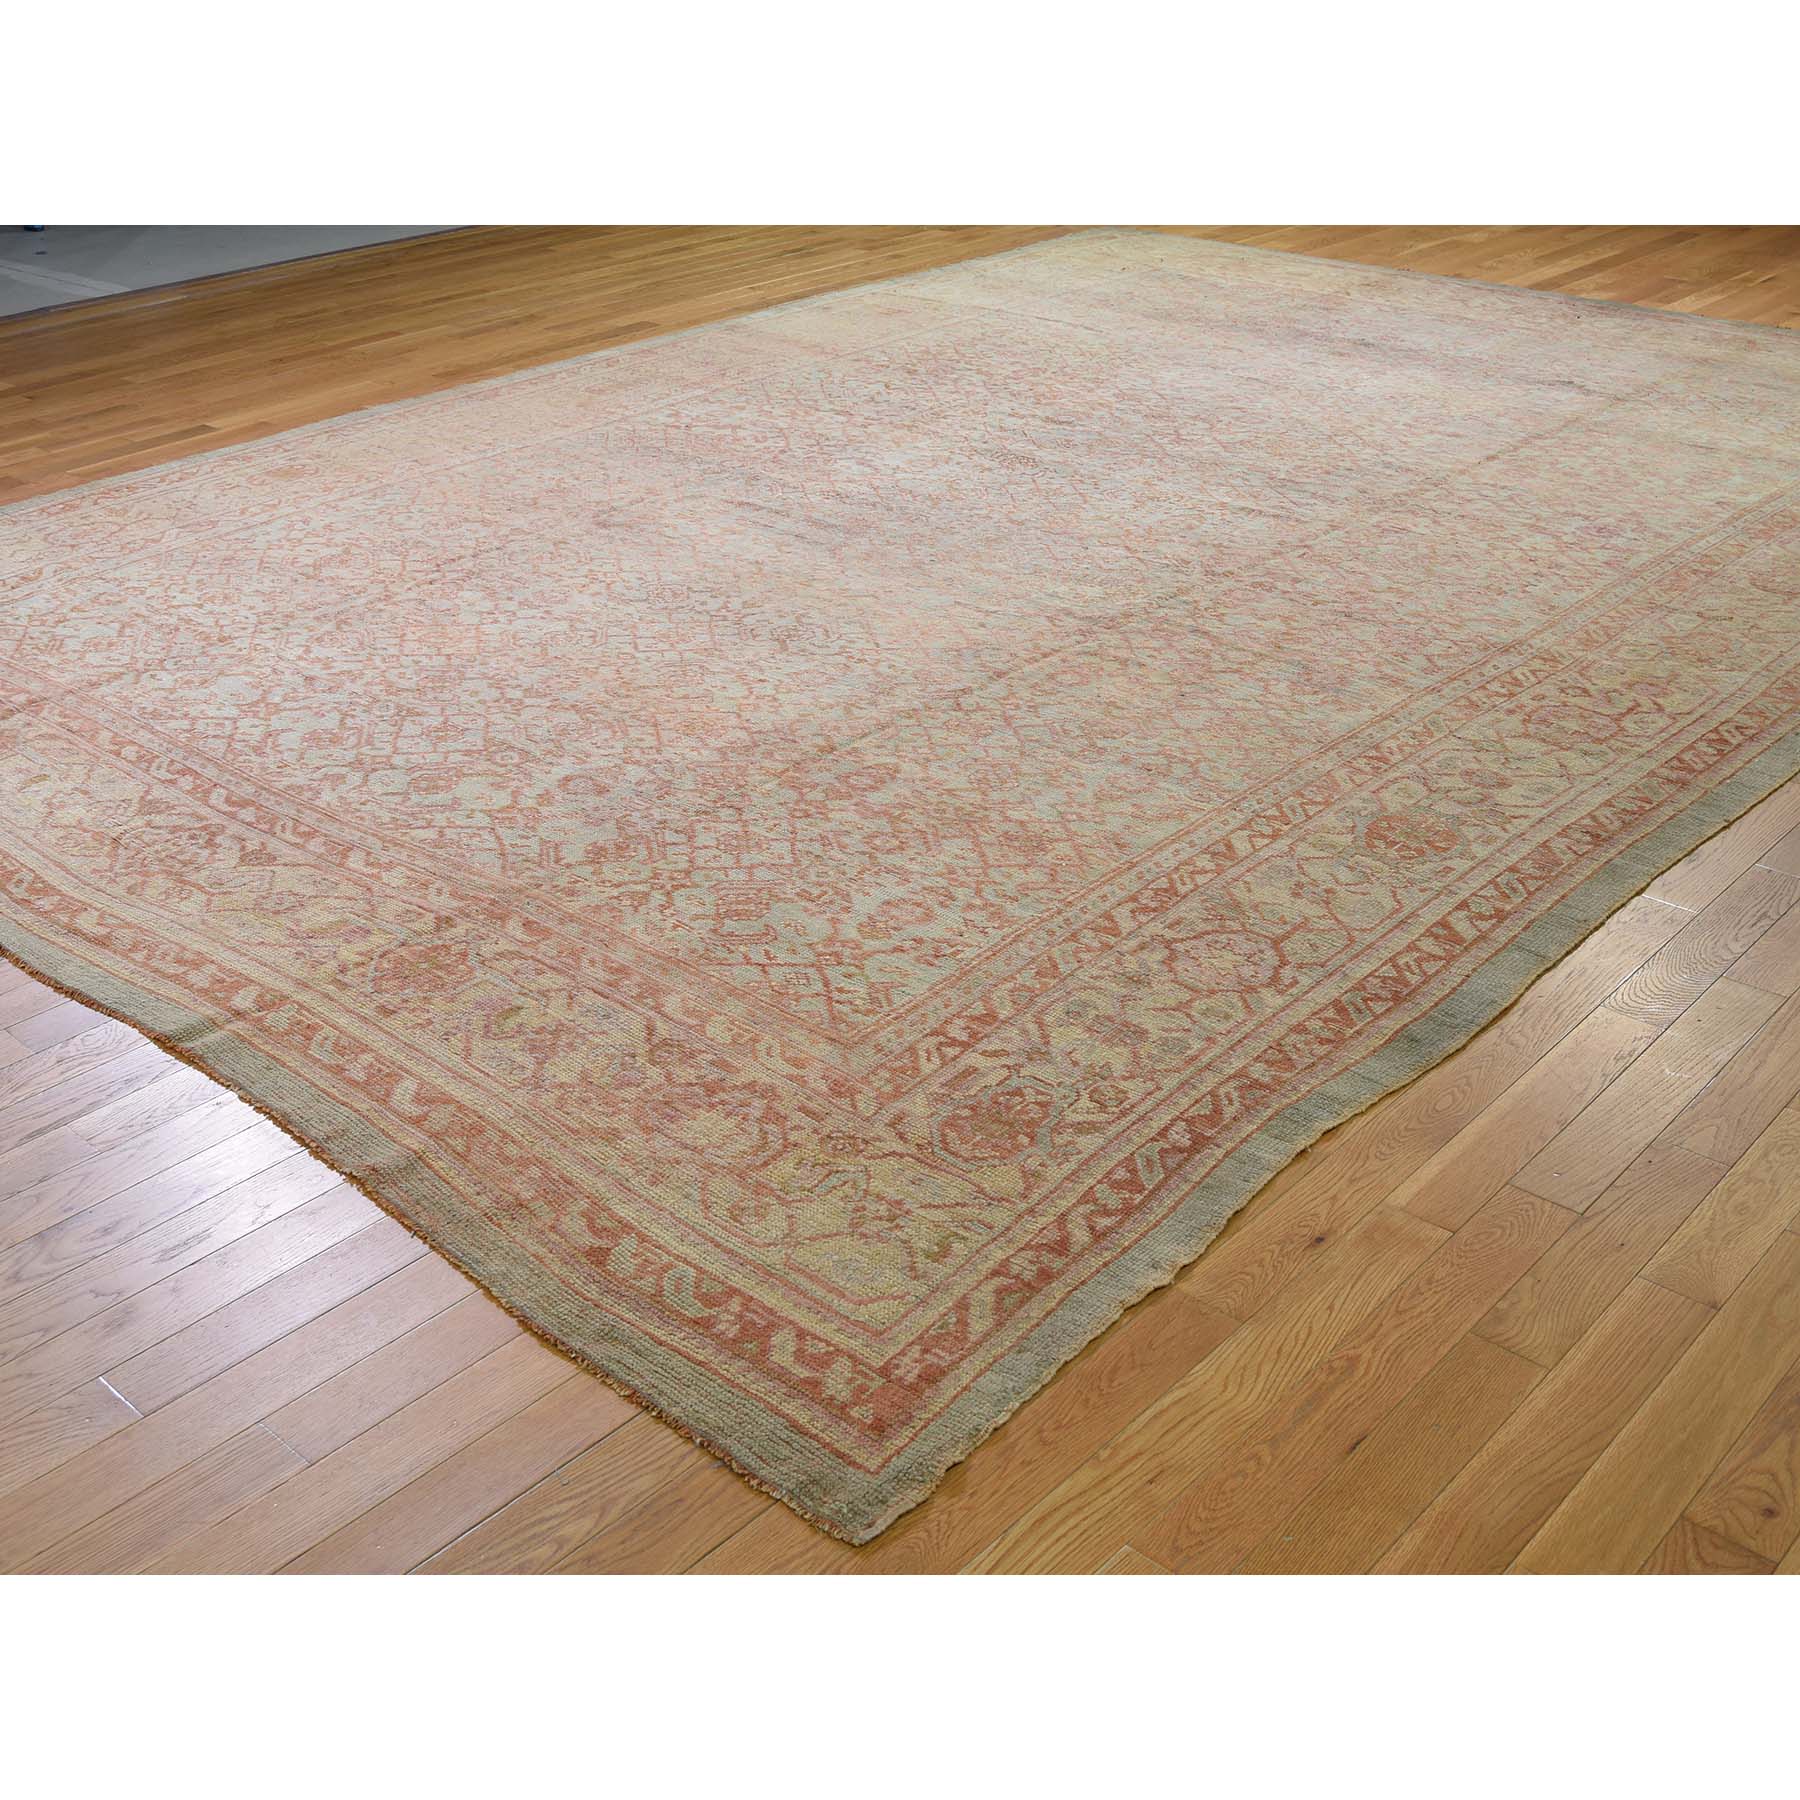 10-10 x15-3  Oversized Antique Turkish Oushak Exc Condition Pure Wool Hand-Knotted Oriental Rug 